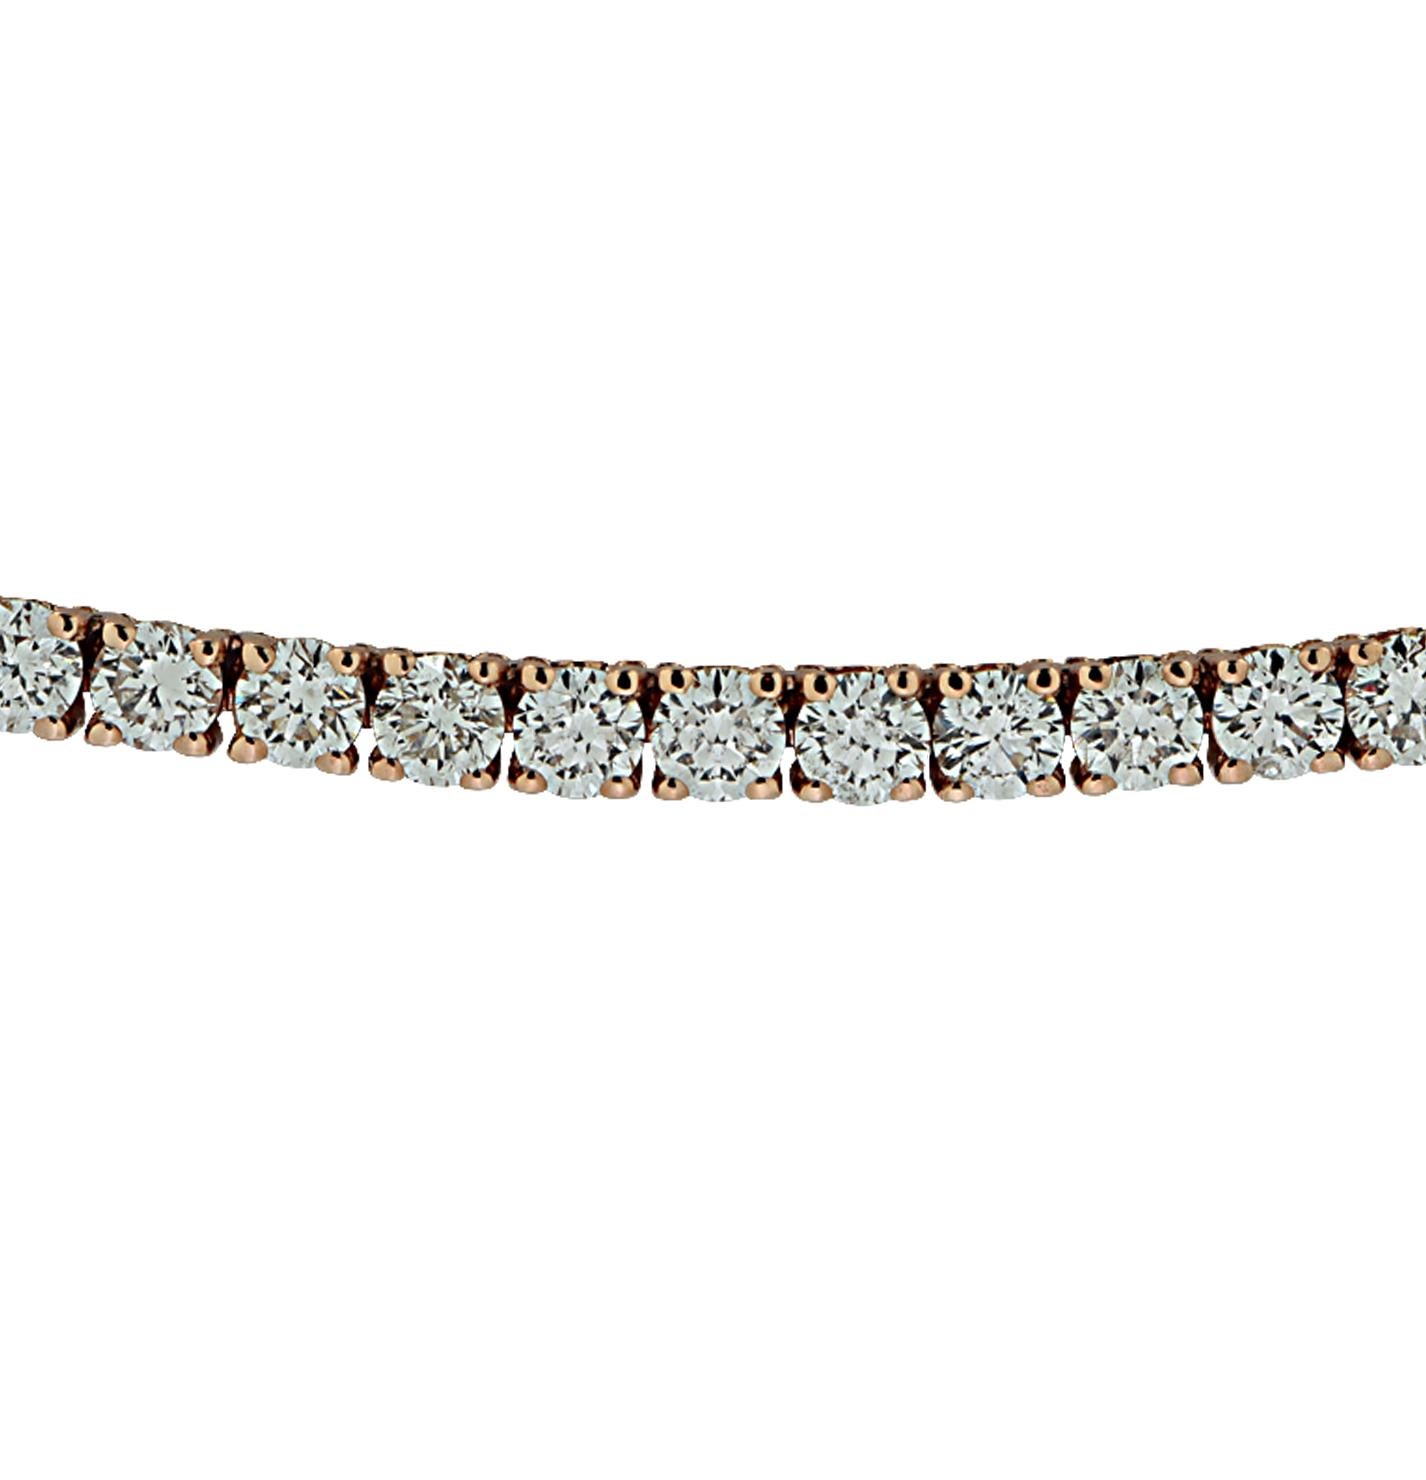 Exquisite Vivid Diamonds Straight Line diamond tennis necklace crafted in Rose Gold, showcasing 168 round brilliant cut diamonds weighing 9.53 carats total, G color, VS-SI Clarity. Each diamond was carefully selected, perfectly matched and set in a